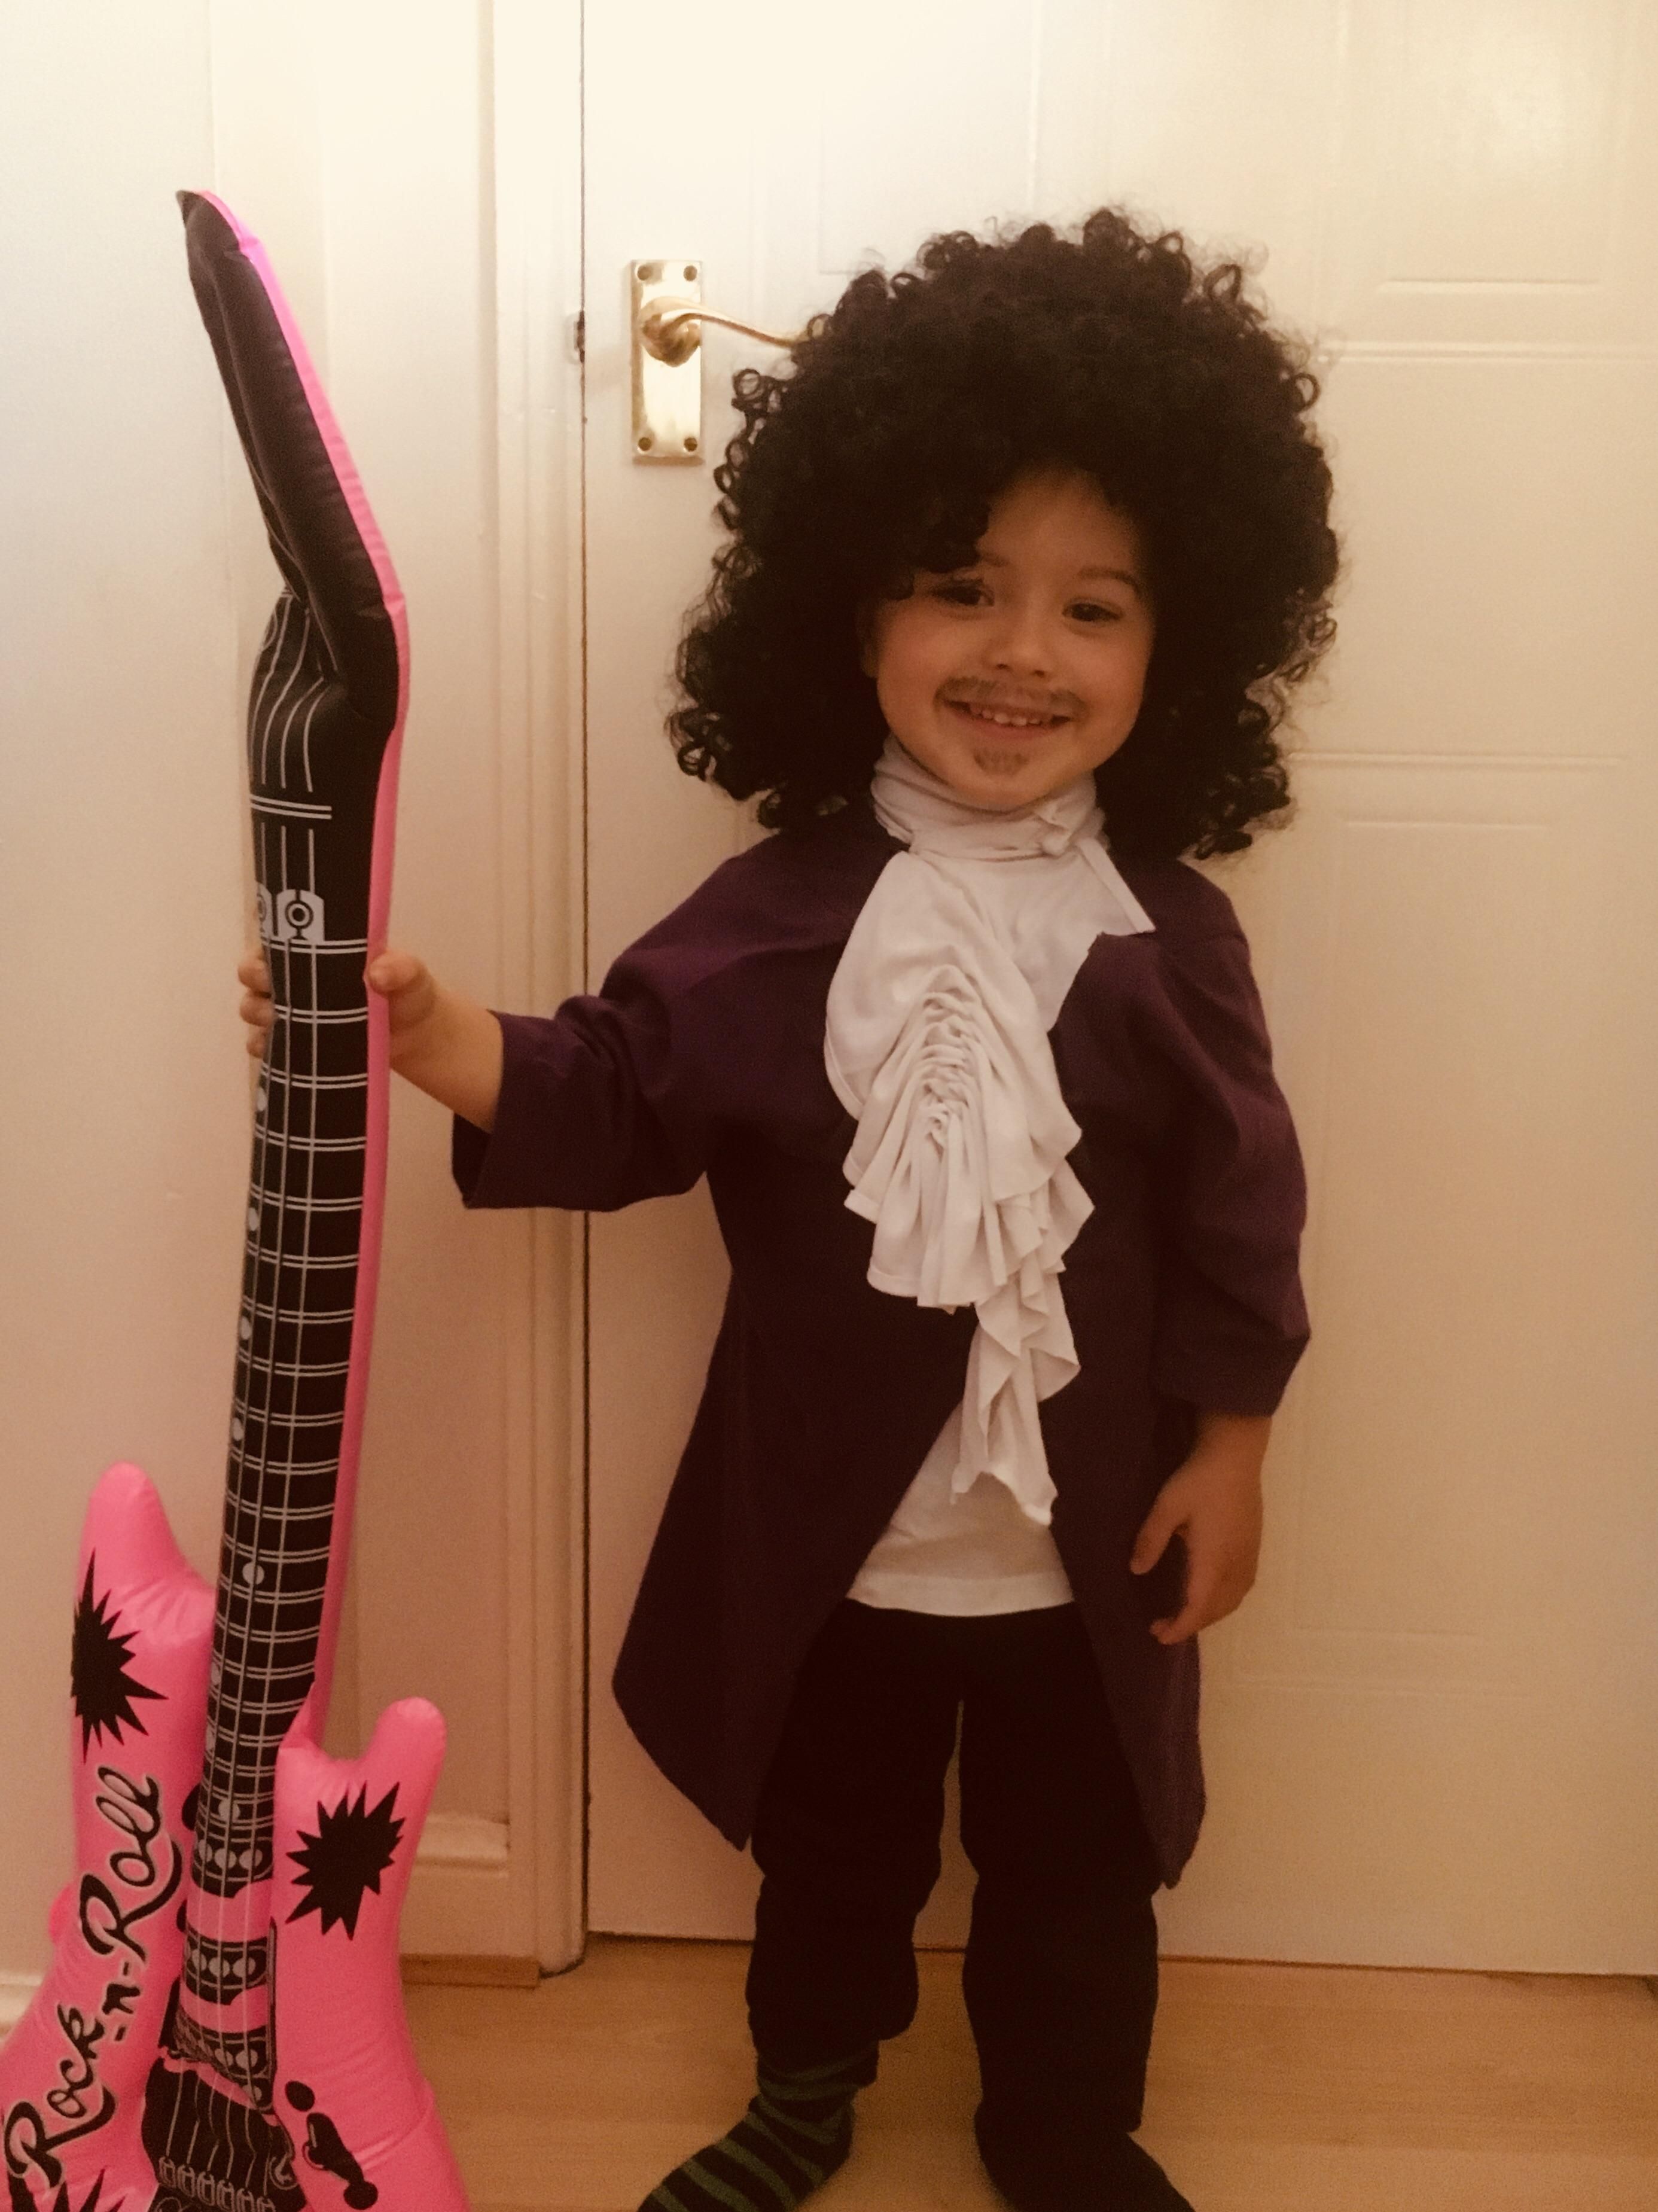 For the Royal Wedding tomorrow, my child’s nursery said the kids can dress as Princes or Princesses. We went for The Artist Formerly Known As Prince.